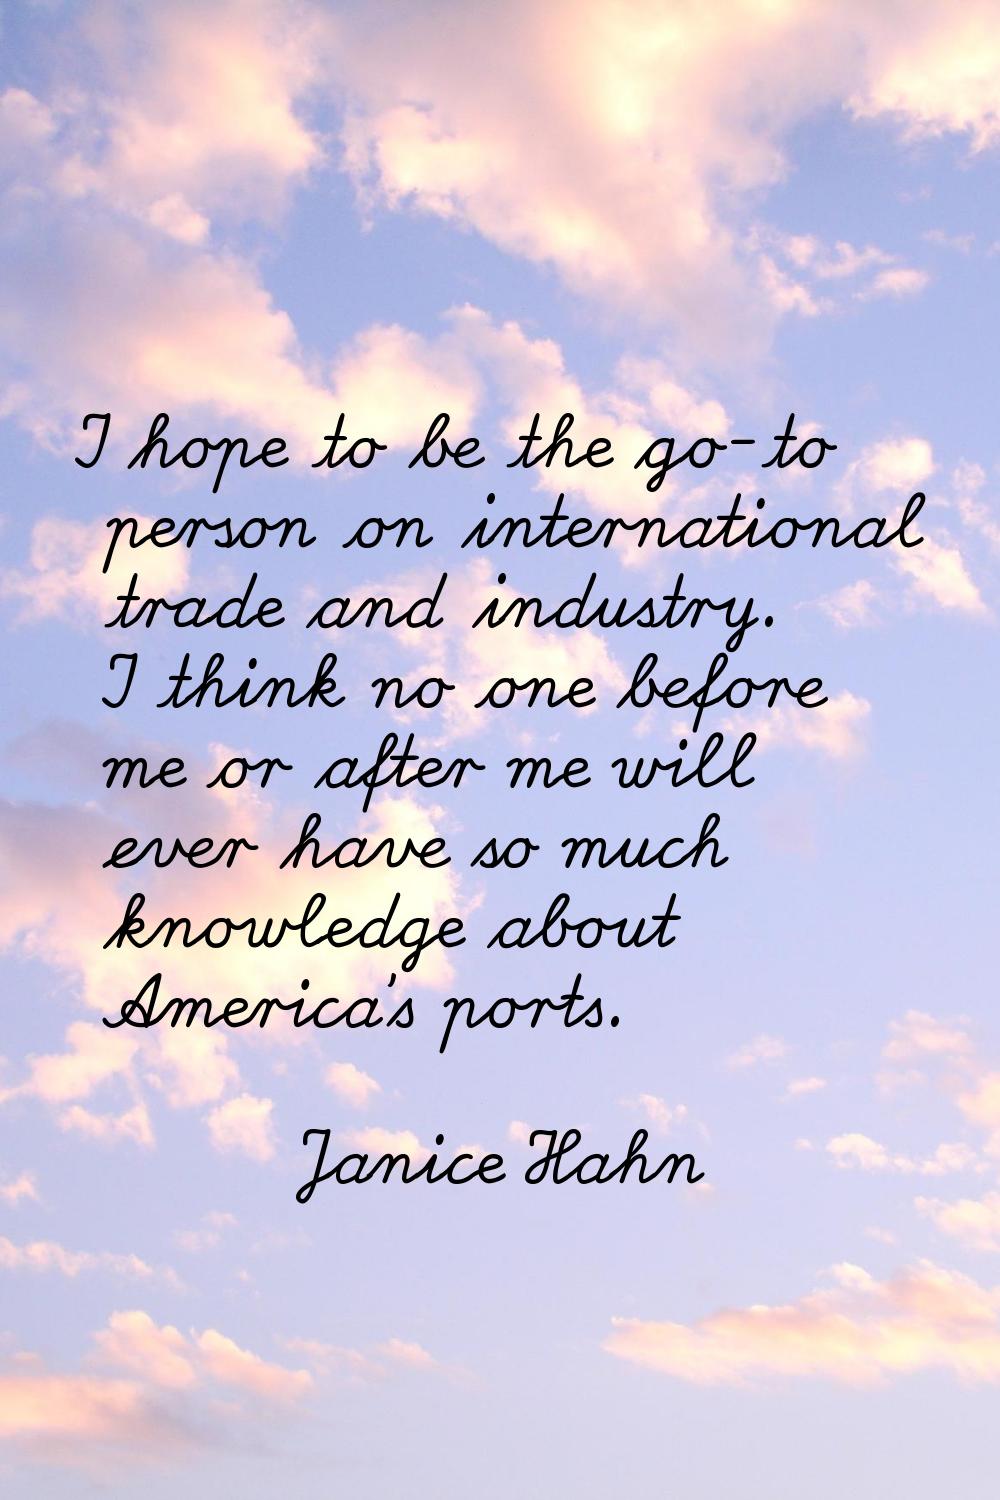 I hope to be the go-to person on international trade and industry. I think no one before me or afte